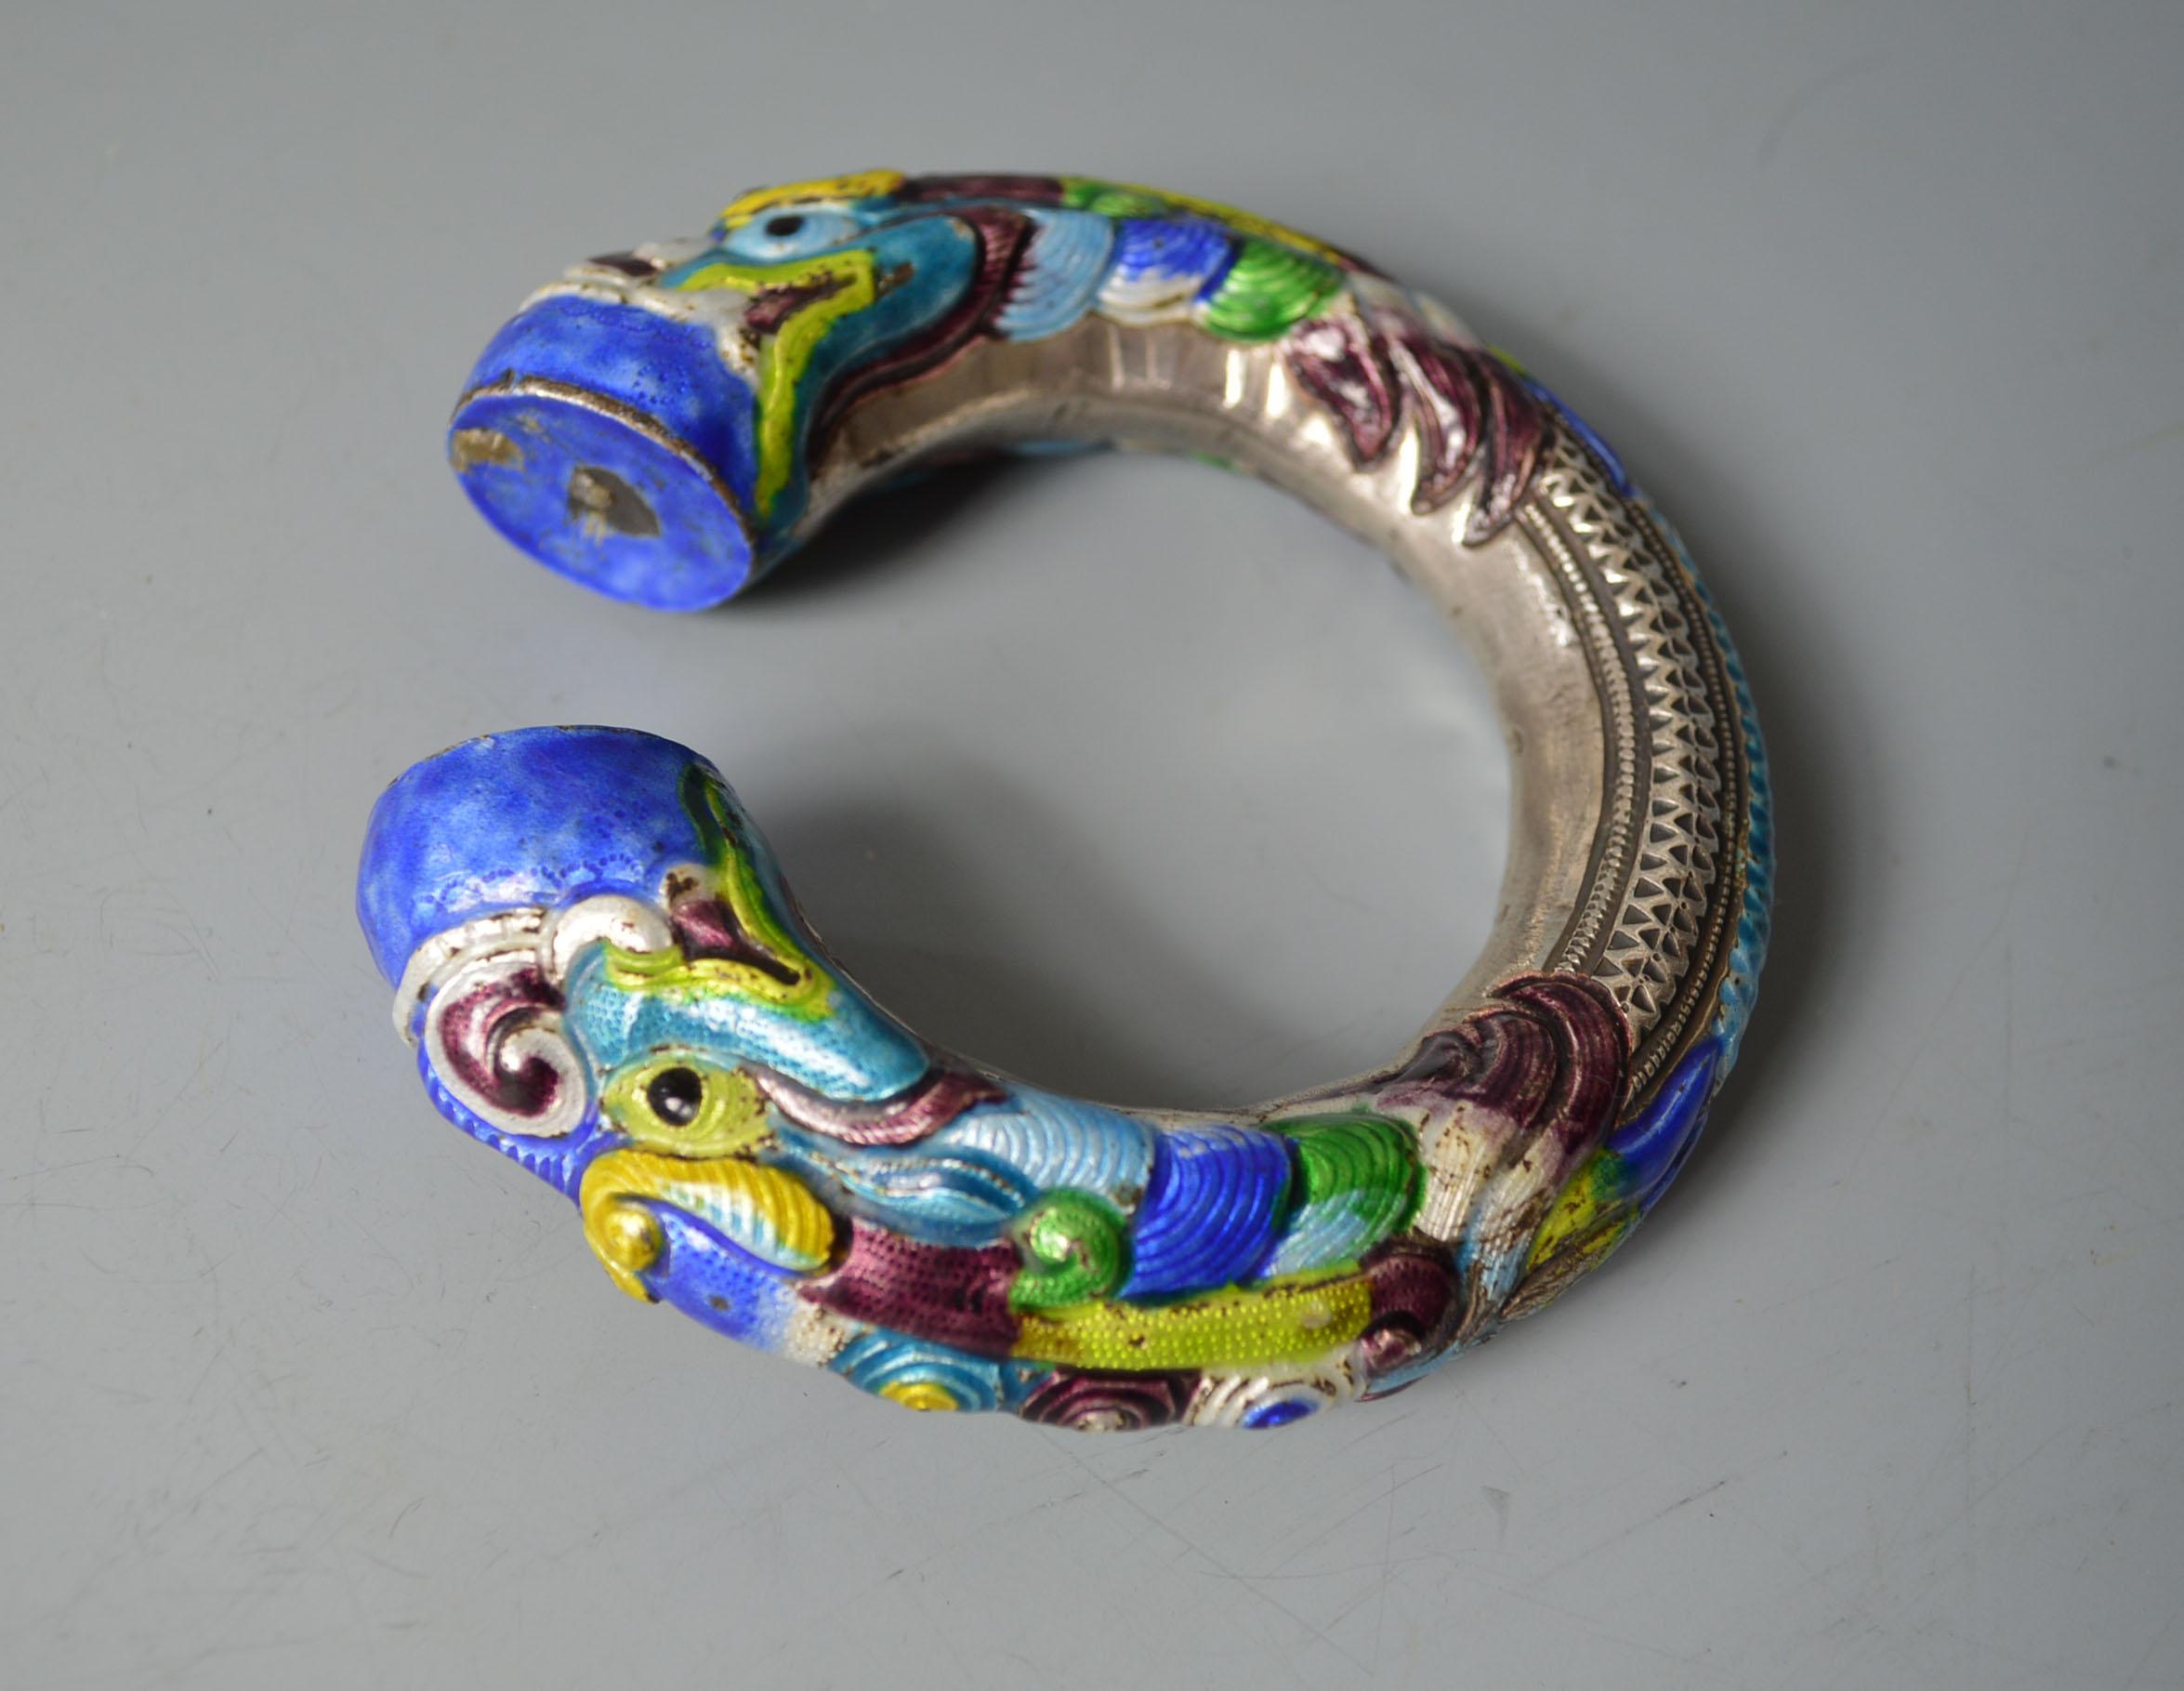 A fine Chinese silver and enamel dragon bracelet from Yunnan
The silver Bracelet with double Dragon head with multi colored Enamel
Period late 19th Early 20th century
Nice wearable antique piece in good condition
Size 4 1/2 inches cm, interior width